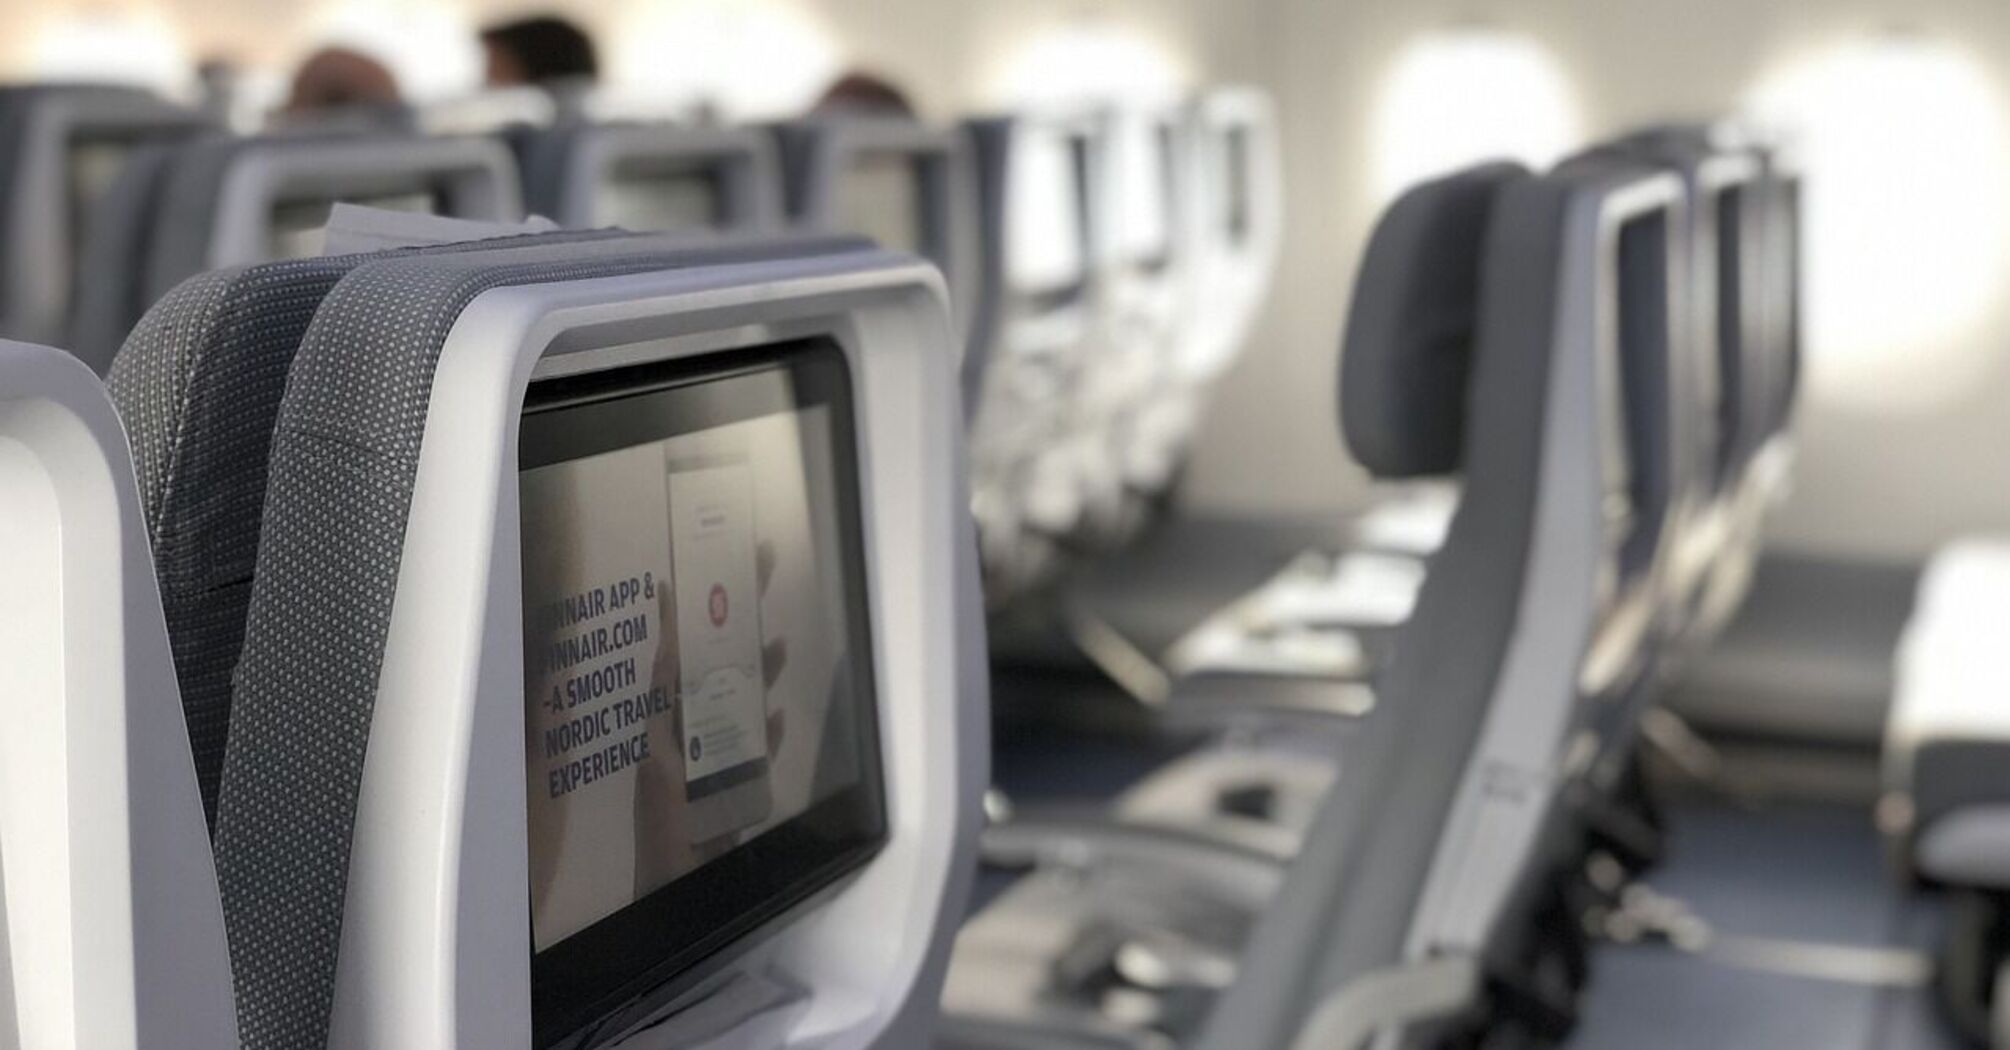 The etiquette expert answered when it is polite to recline the seat on an airplane and when it should not be done